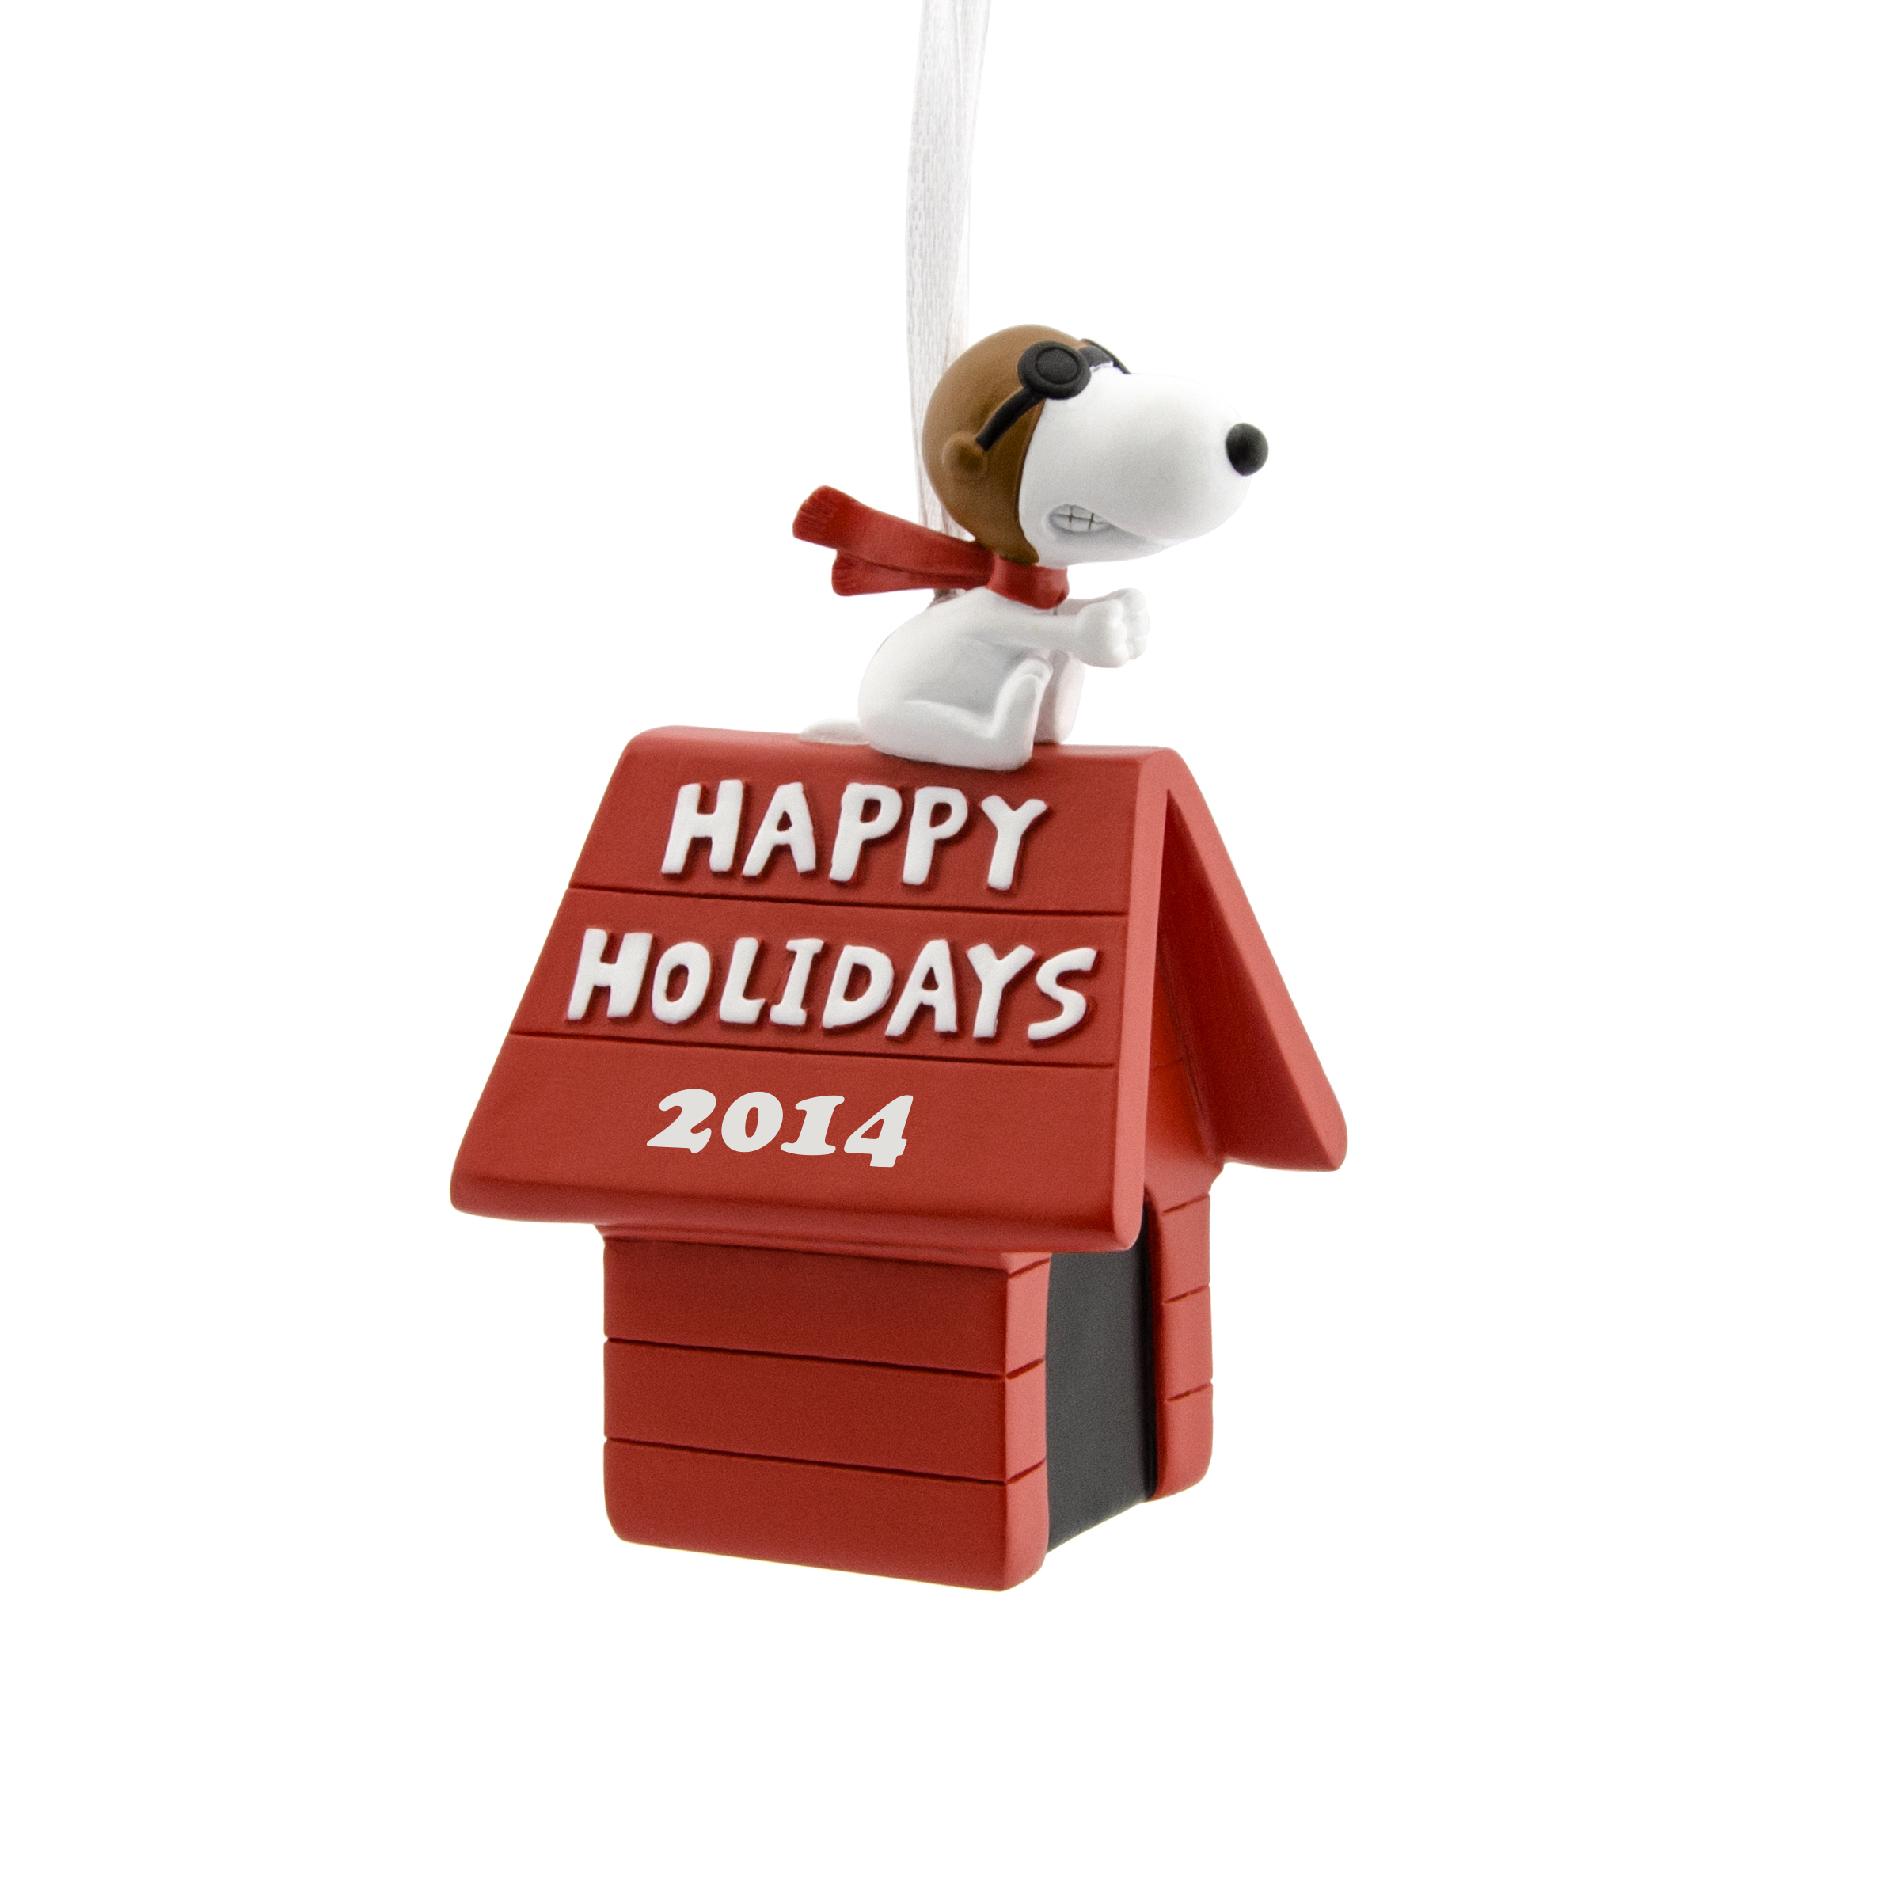 Peanuts By Schulz SHallmark Snoopy as Red Baron Christmas Ornament